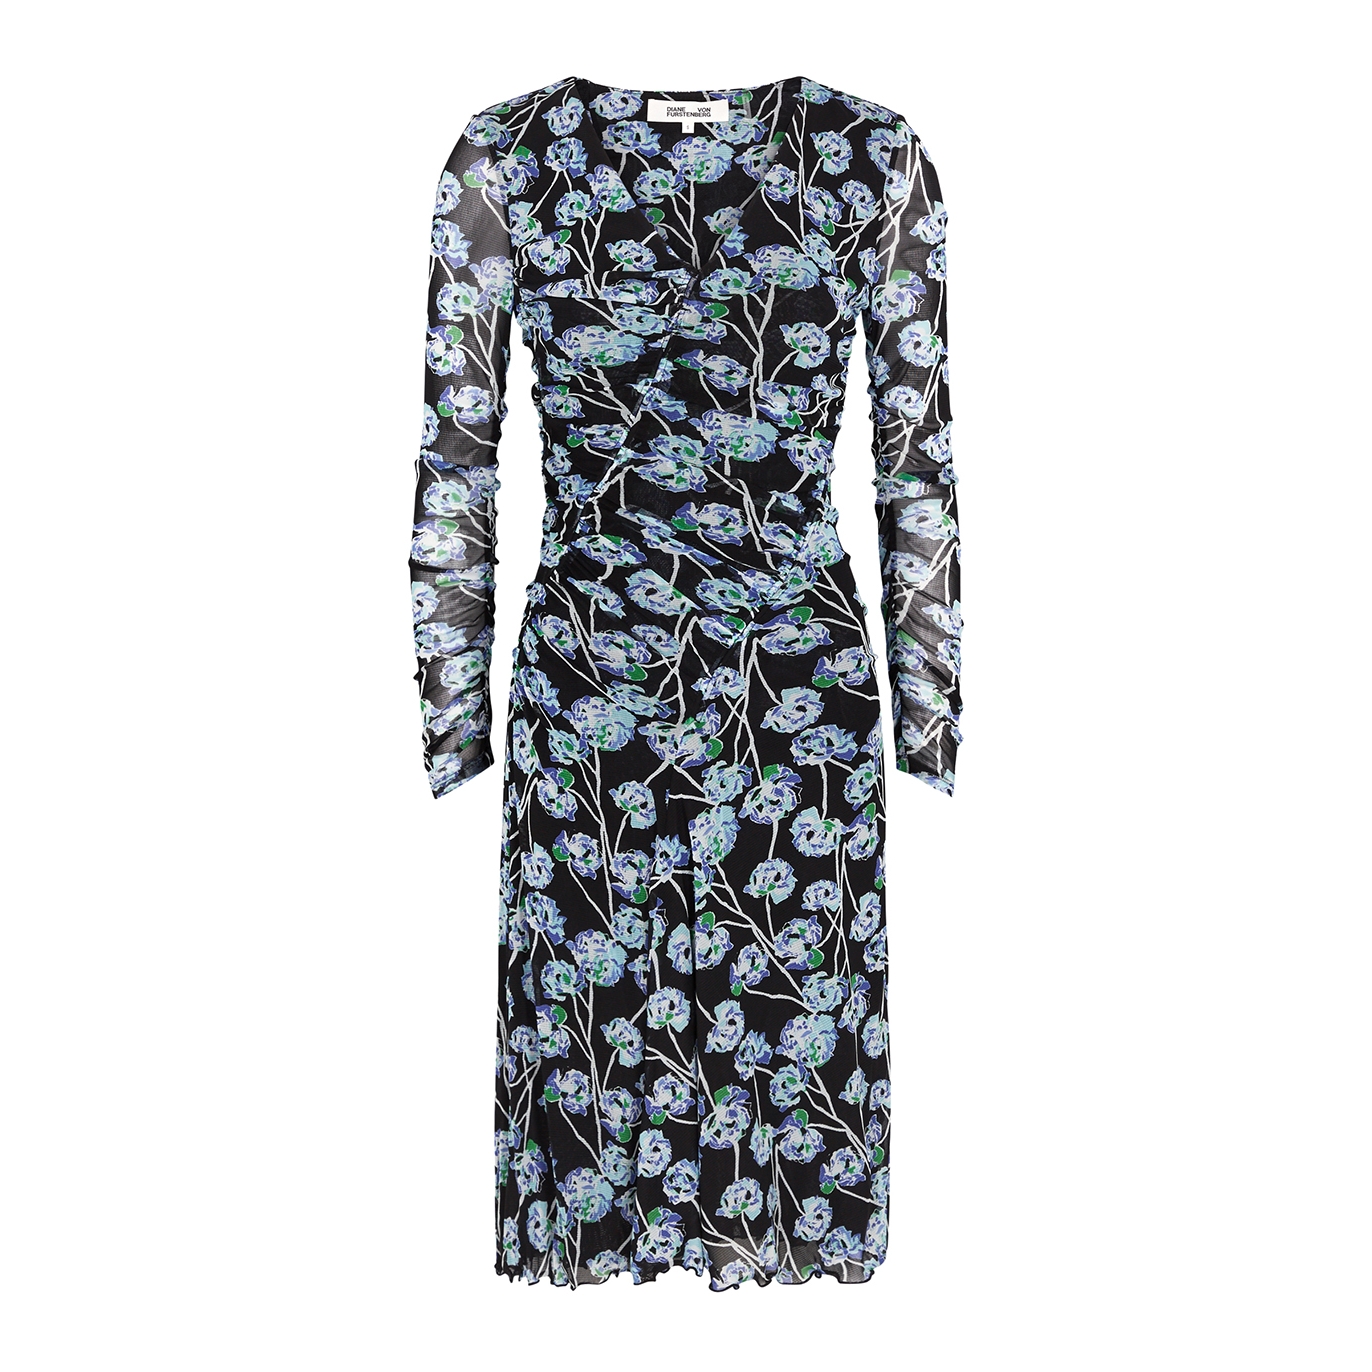 DIANE VON FURSTENBERG DIANE VON FURSTENBERG MISSY FLORAL-PRINT RUCHED DRESS